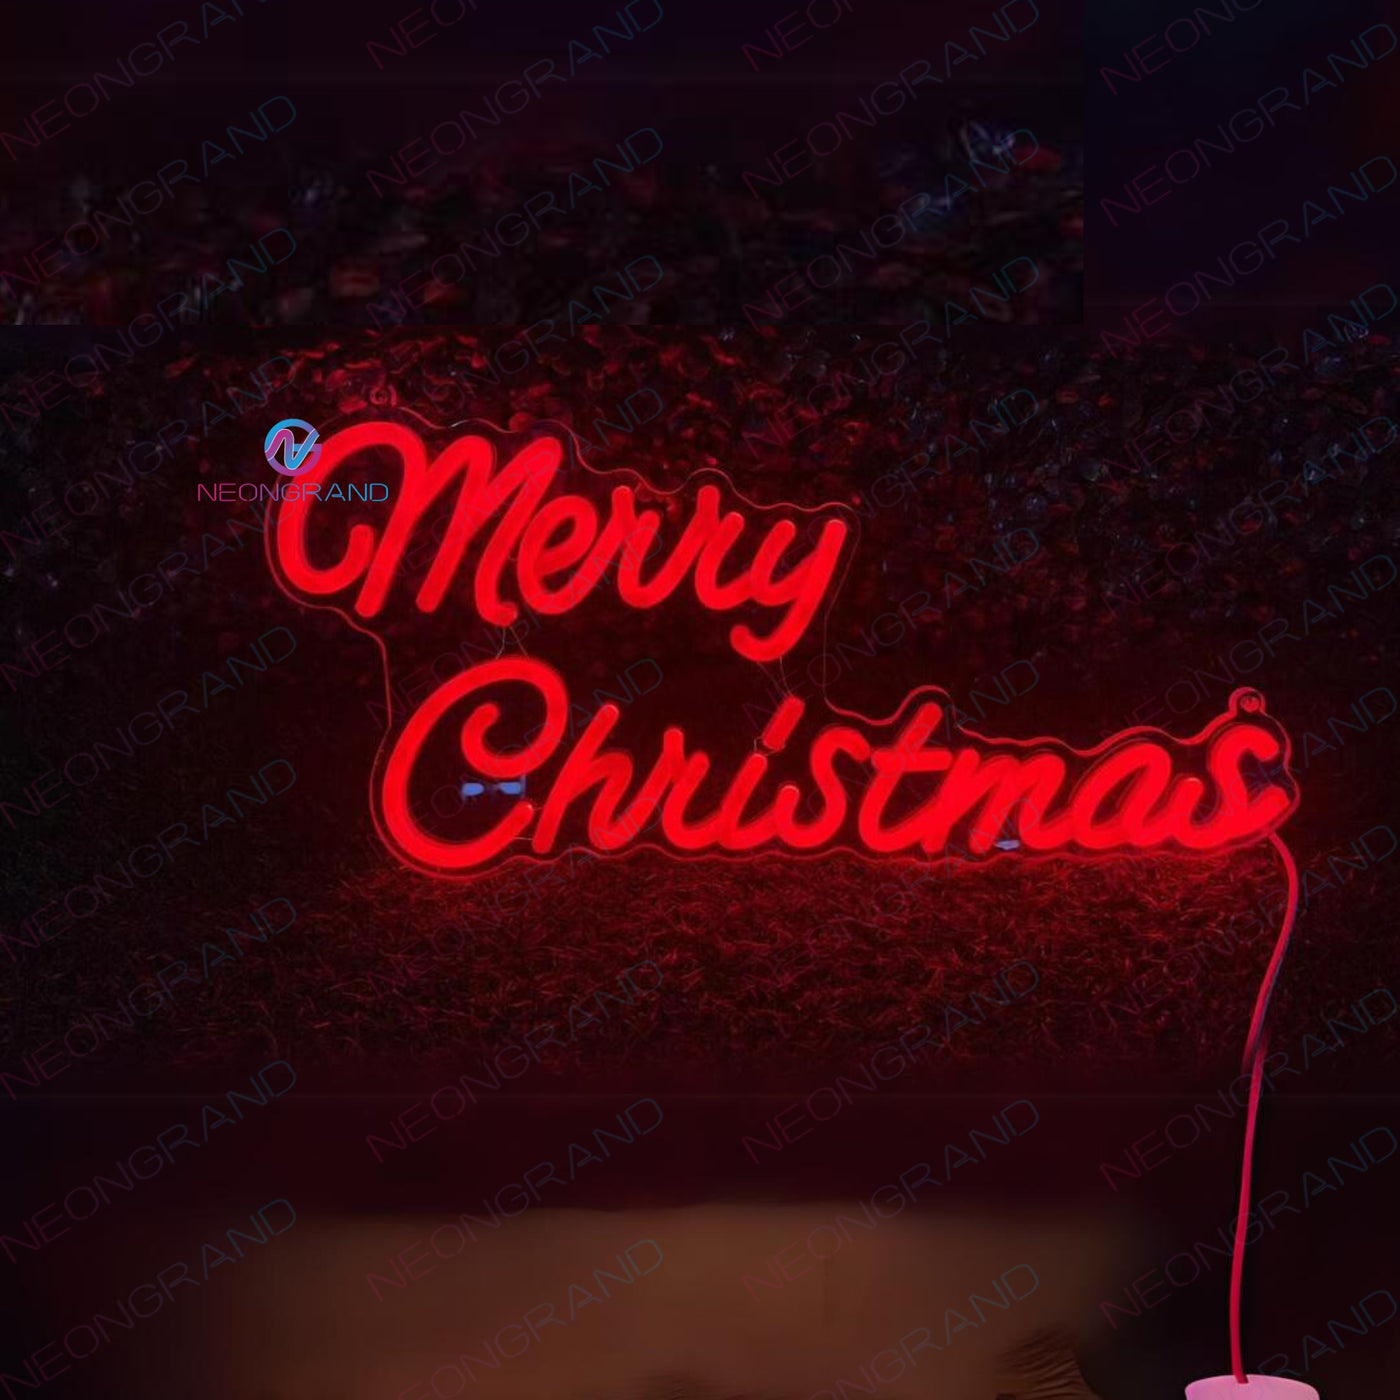 Merry Christmas Neon Sign USB Red Led Light (In Stock: 5-7 Days Delivery)